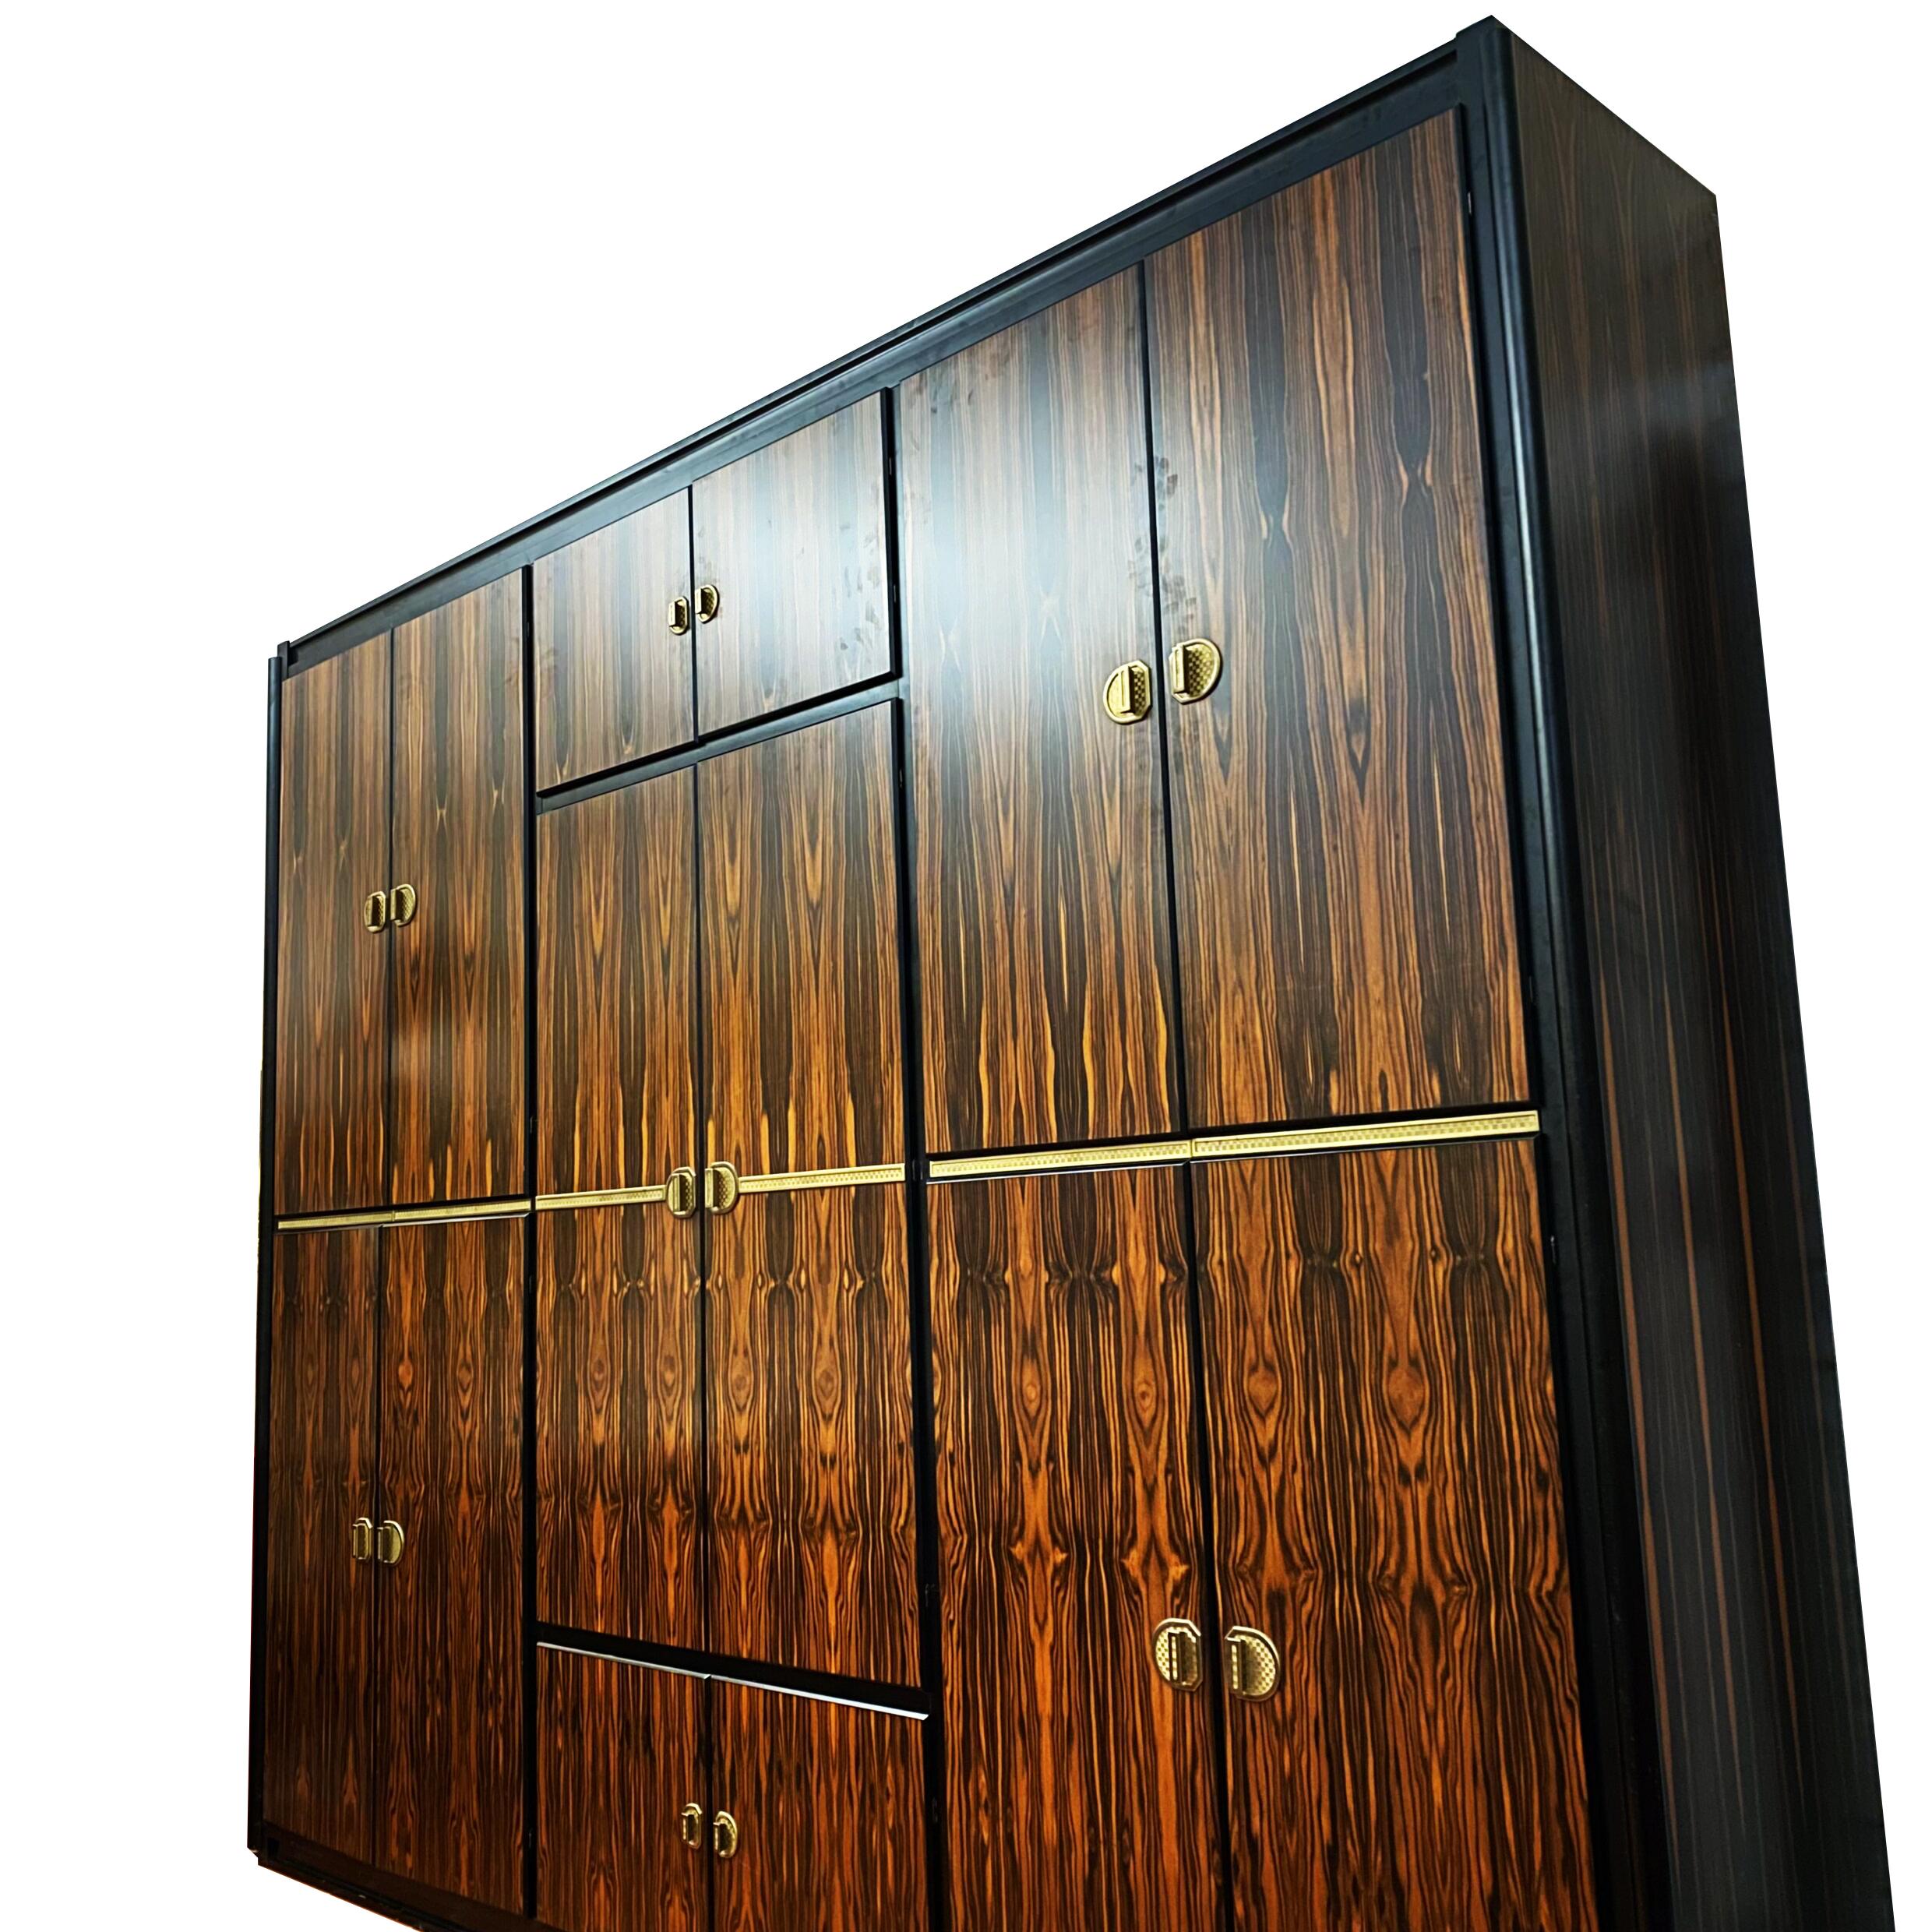 Italian Wardrobe in macassar and brass attributed to Luciano Frigerio, Italy, 1970s.

Massive and rare wardrobe in macassar ebony and Brass elements, consisting of 7 compartments, with central chest of drawers.
The interior is in cherry wood.
A